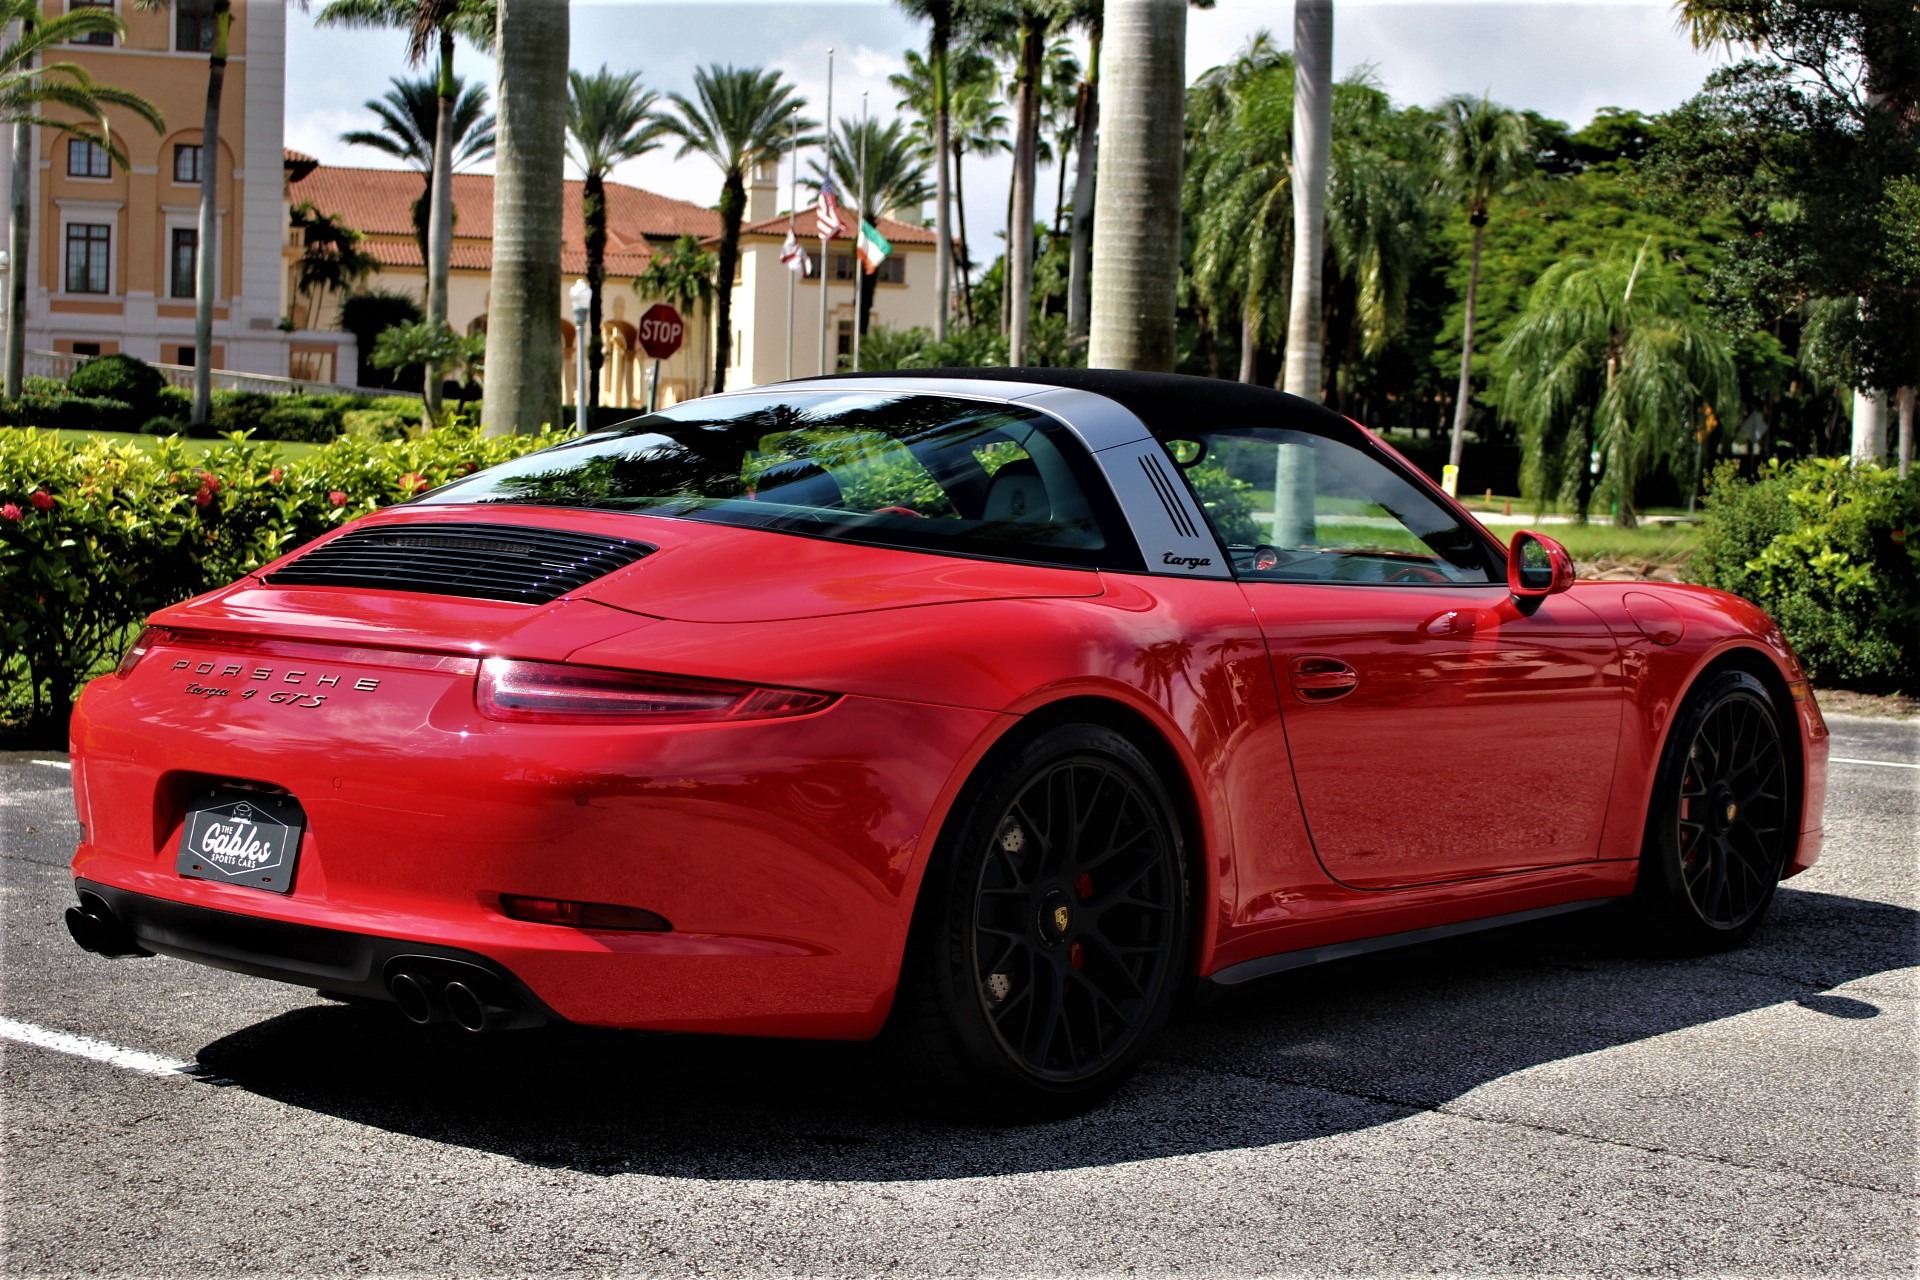 Used 2016 Porsche 911 Targa 4 GTS for sale Sold at The Gables Sports Cars in Miami FL 33146 4